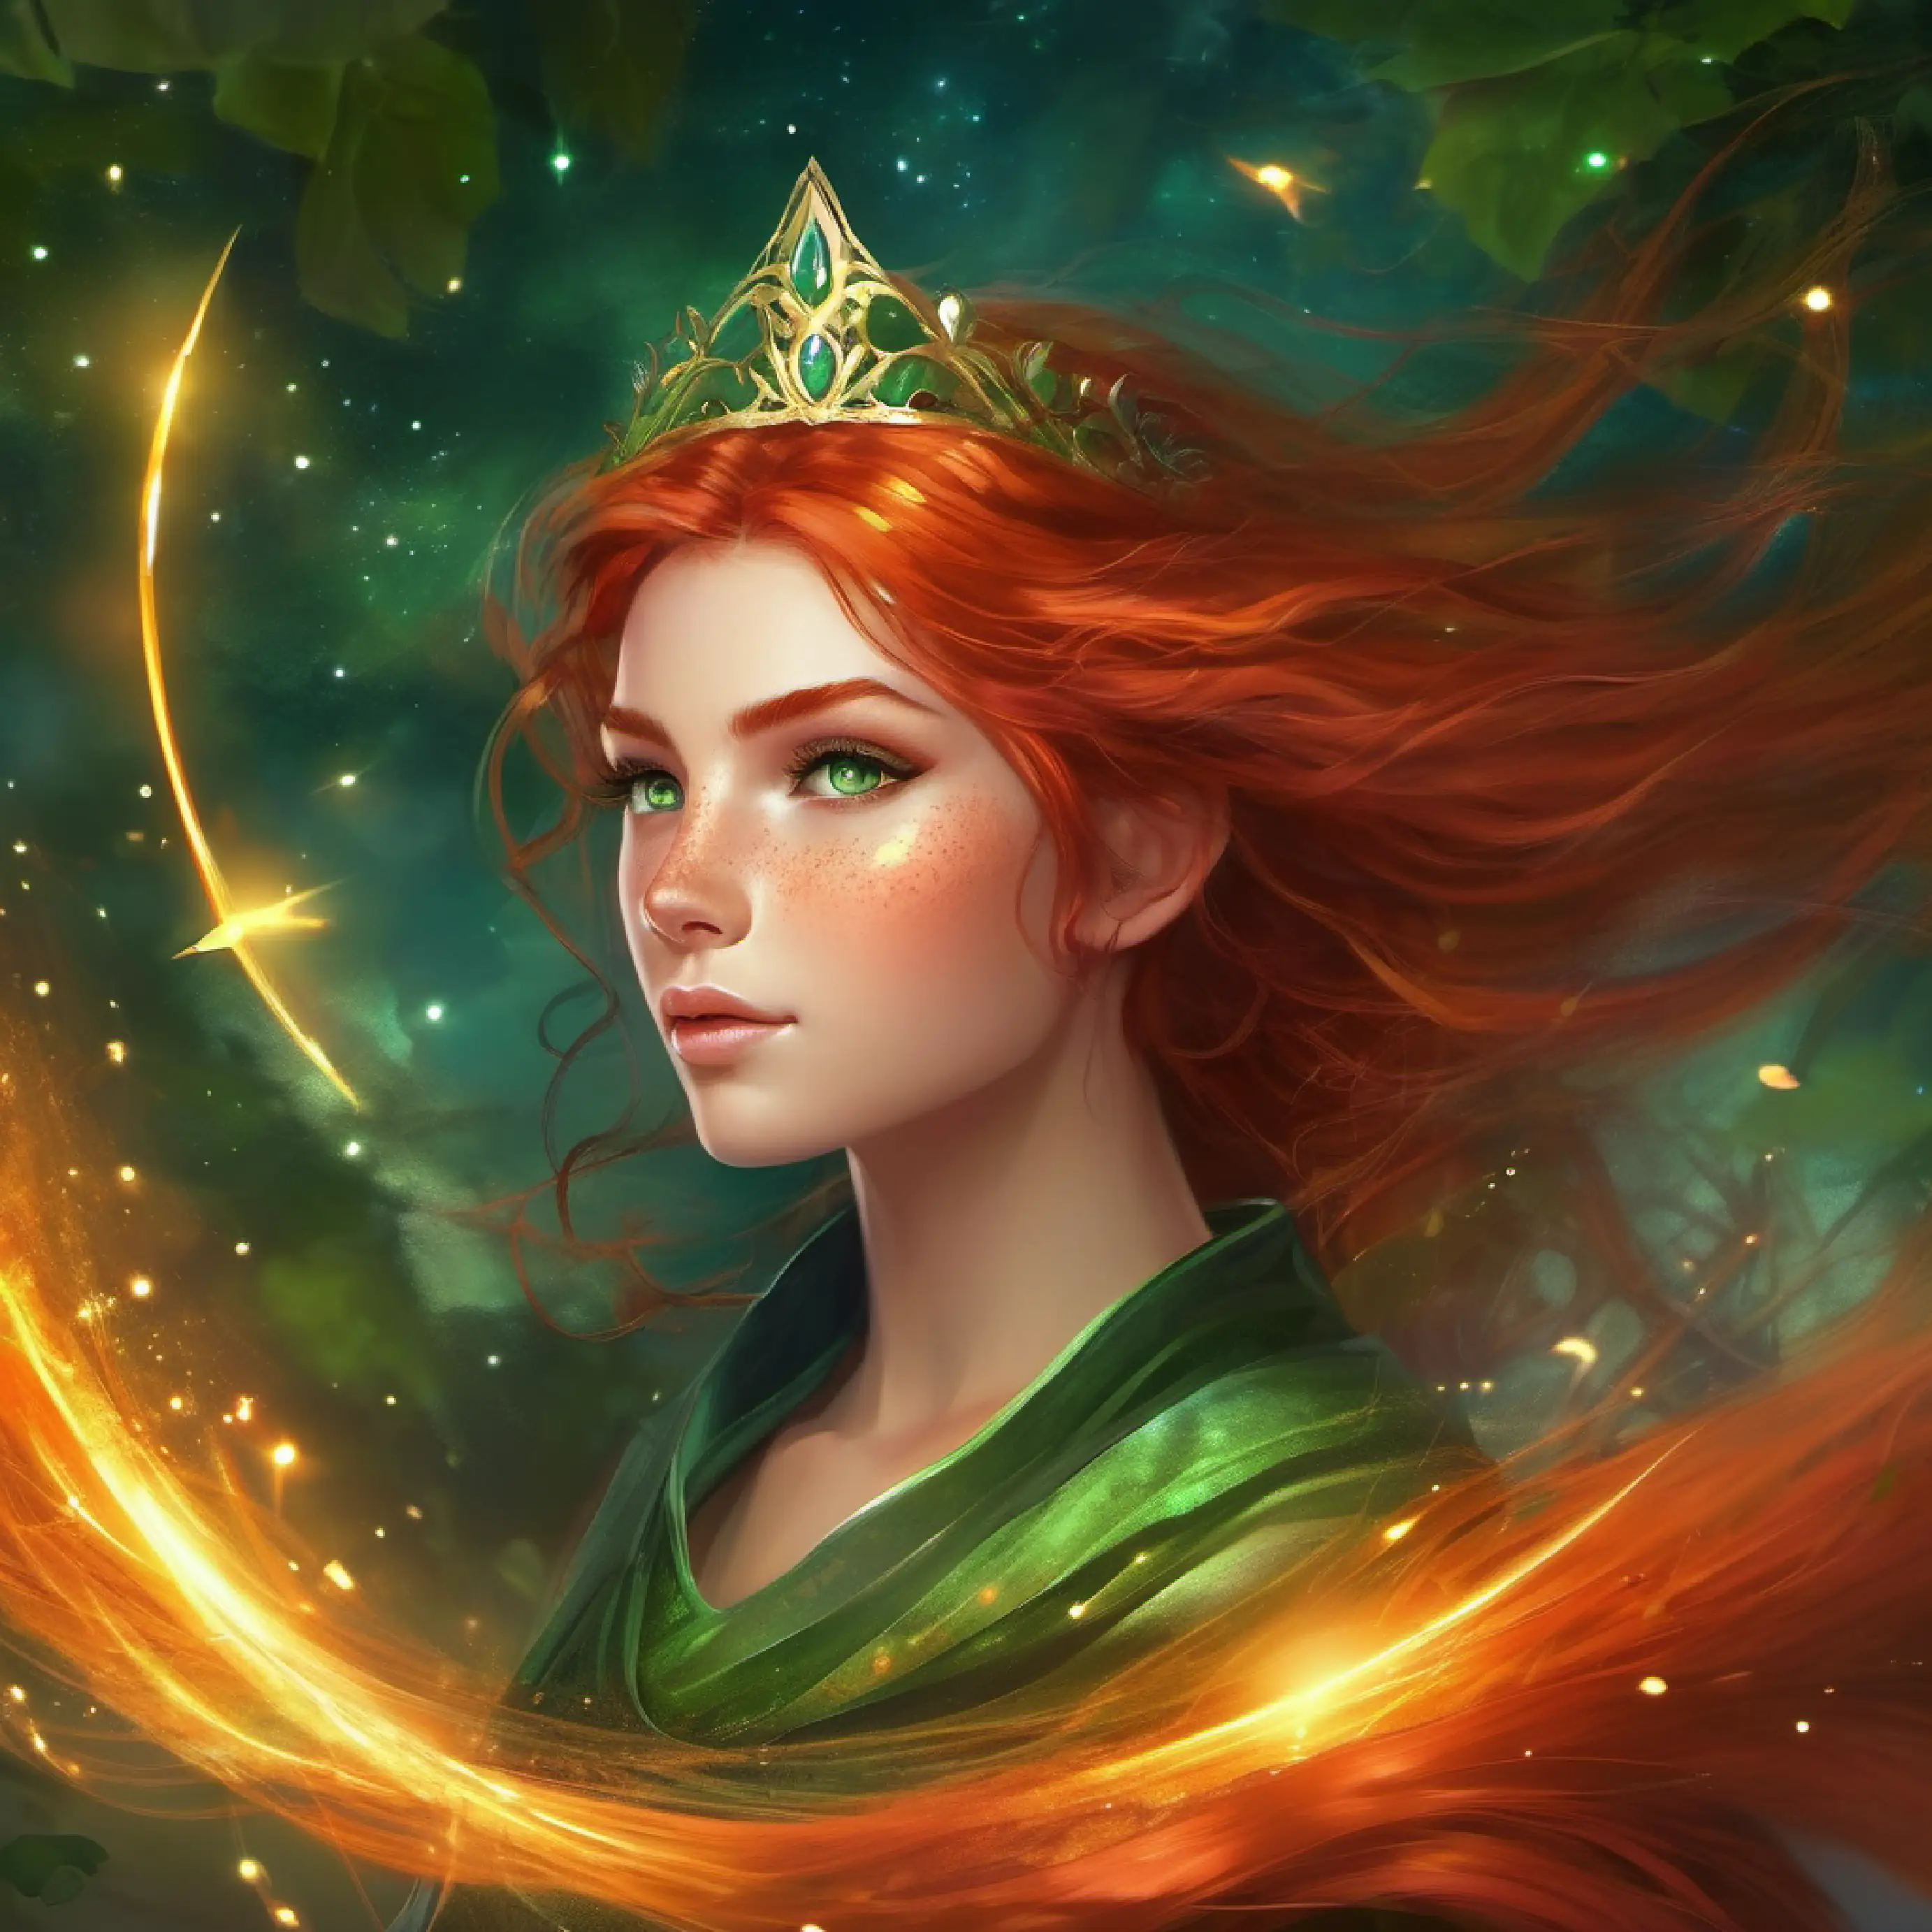 Description of Princess Brave girl with freckles, green eyes, and wild red hair's unconventional interests